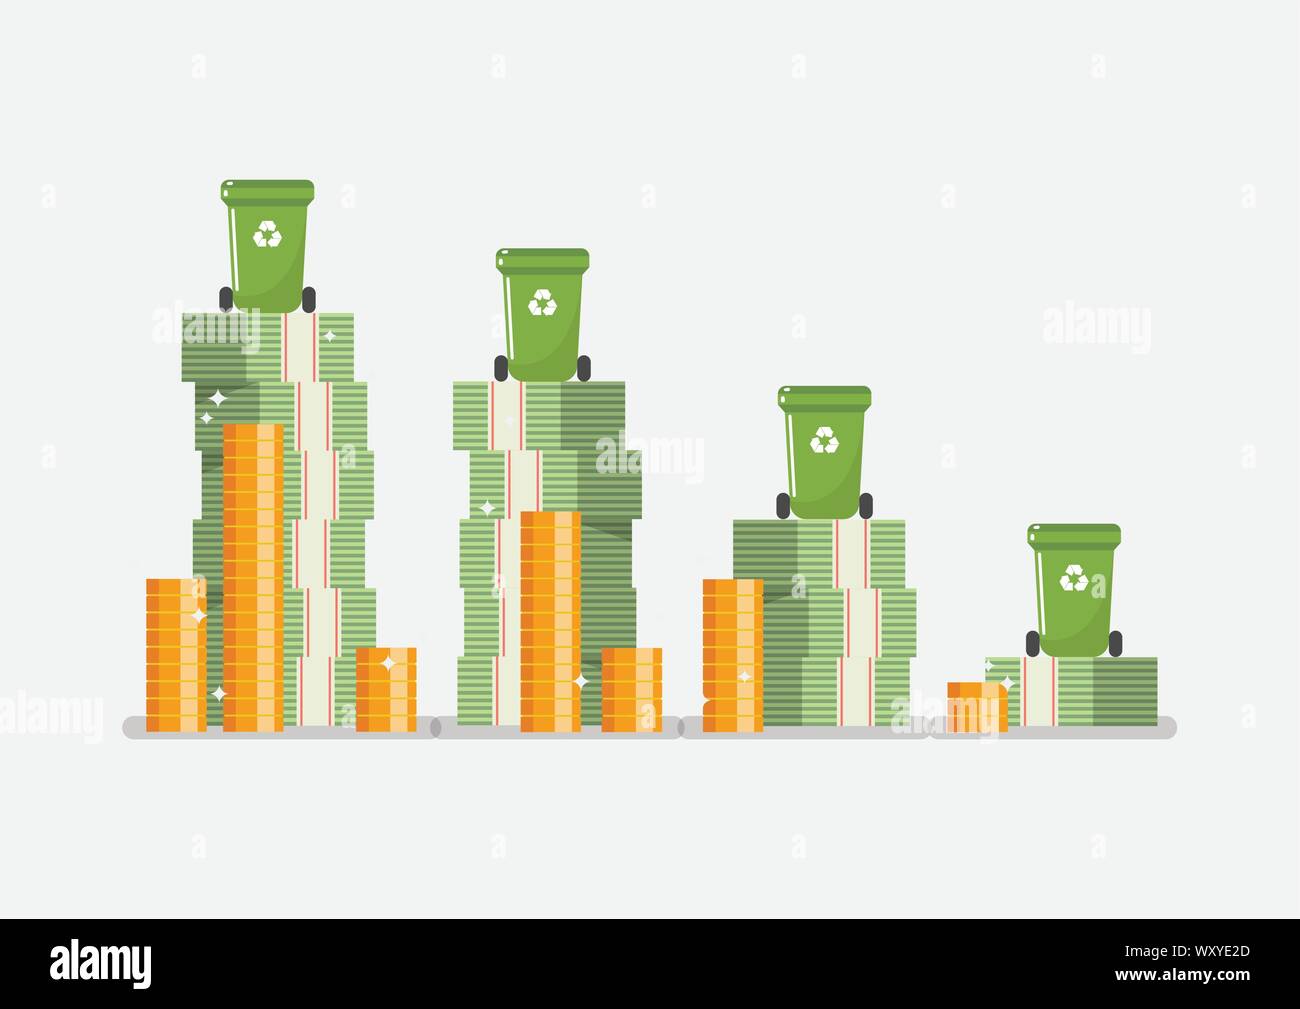 Waste management budget infographic. Vector illustration Stock Vector